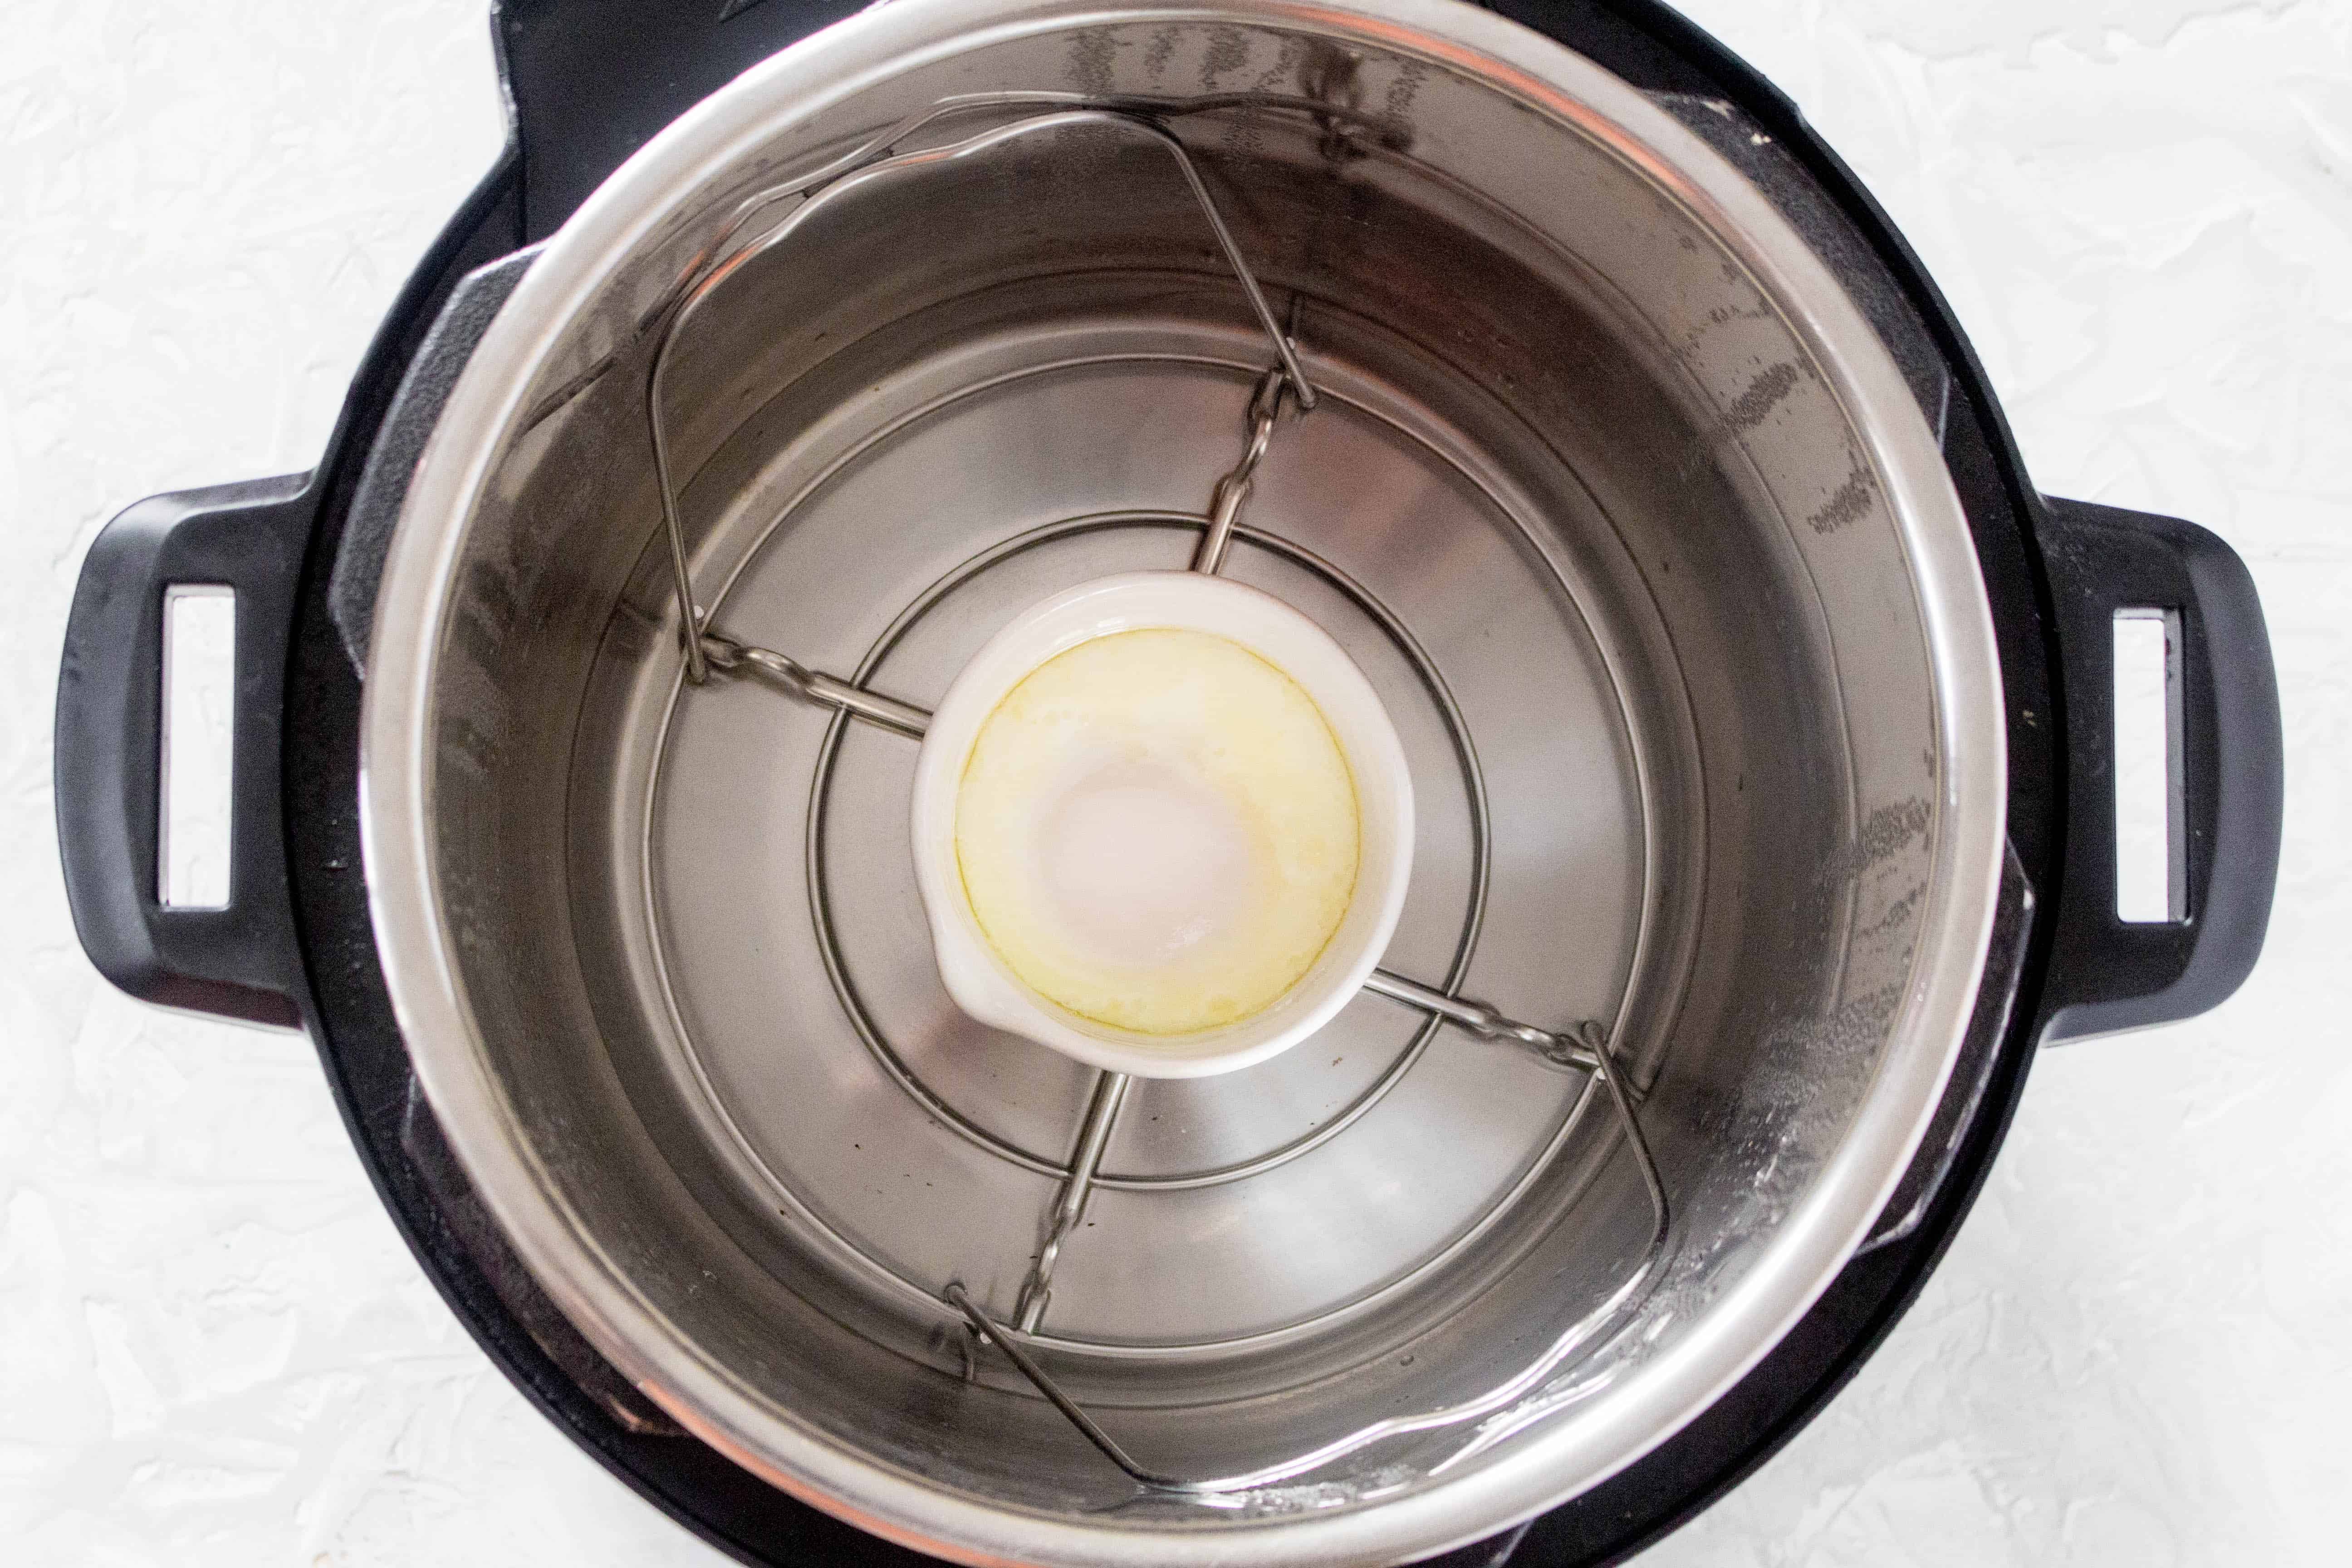 What You'll Need To Make Instant Pot Poached Eggs